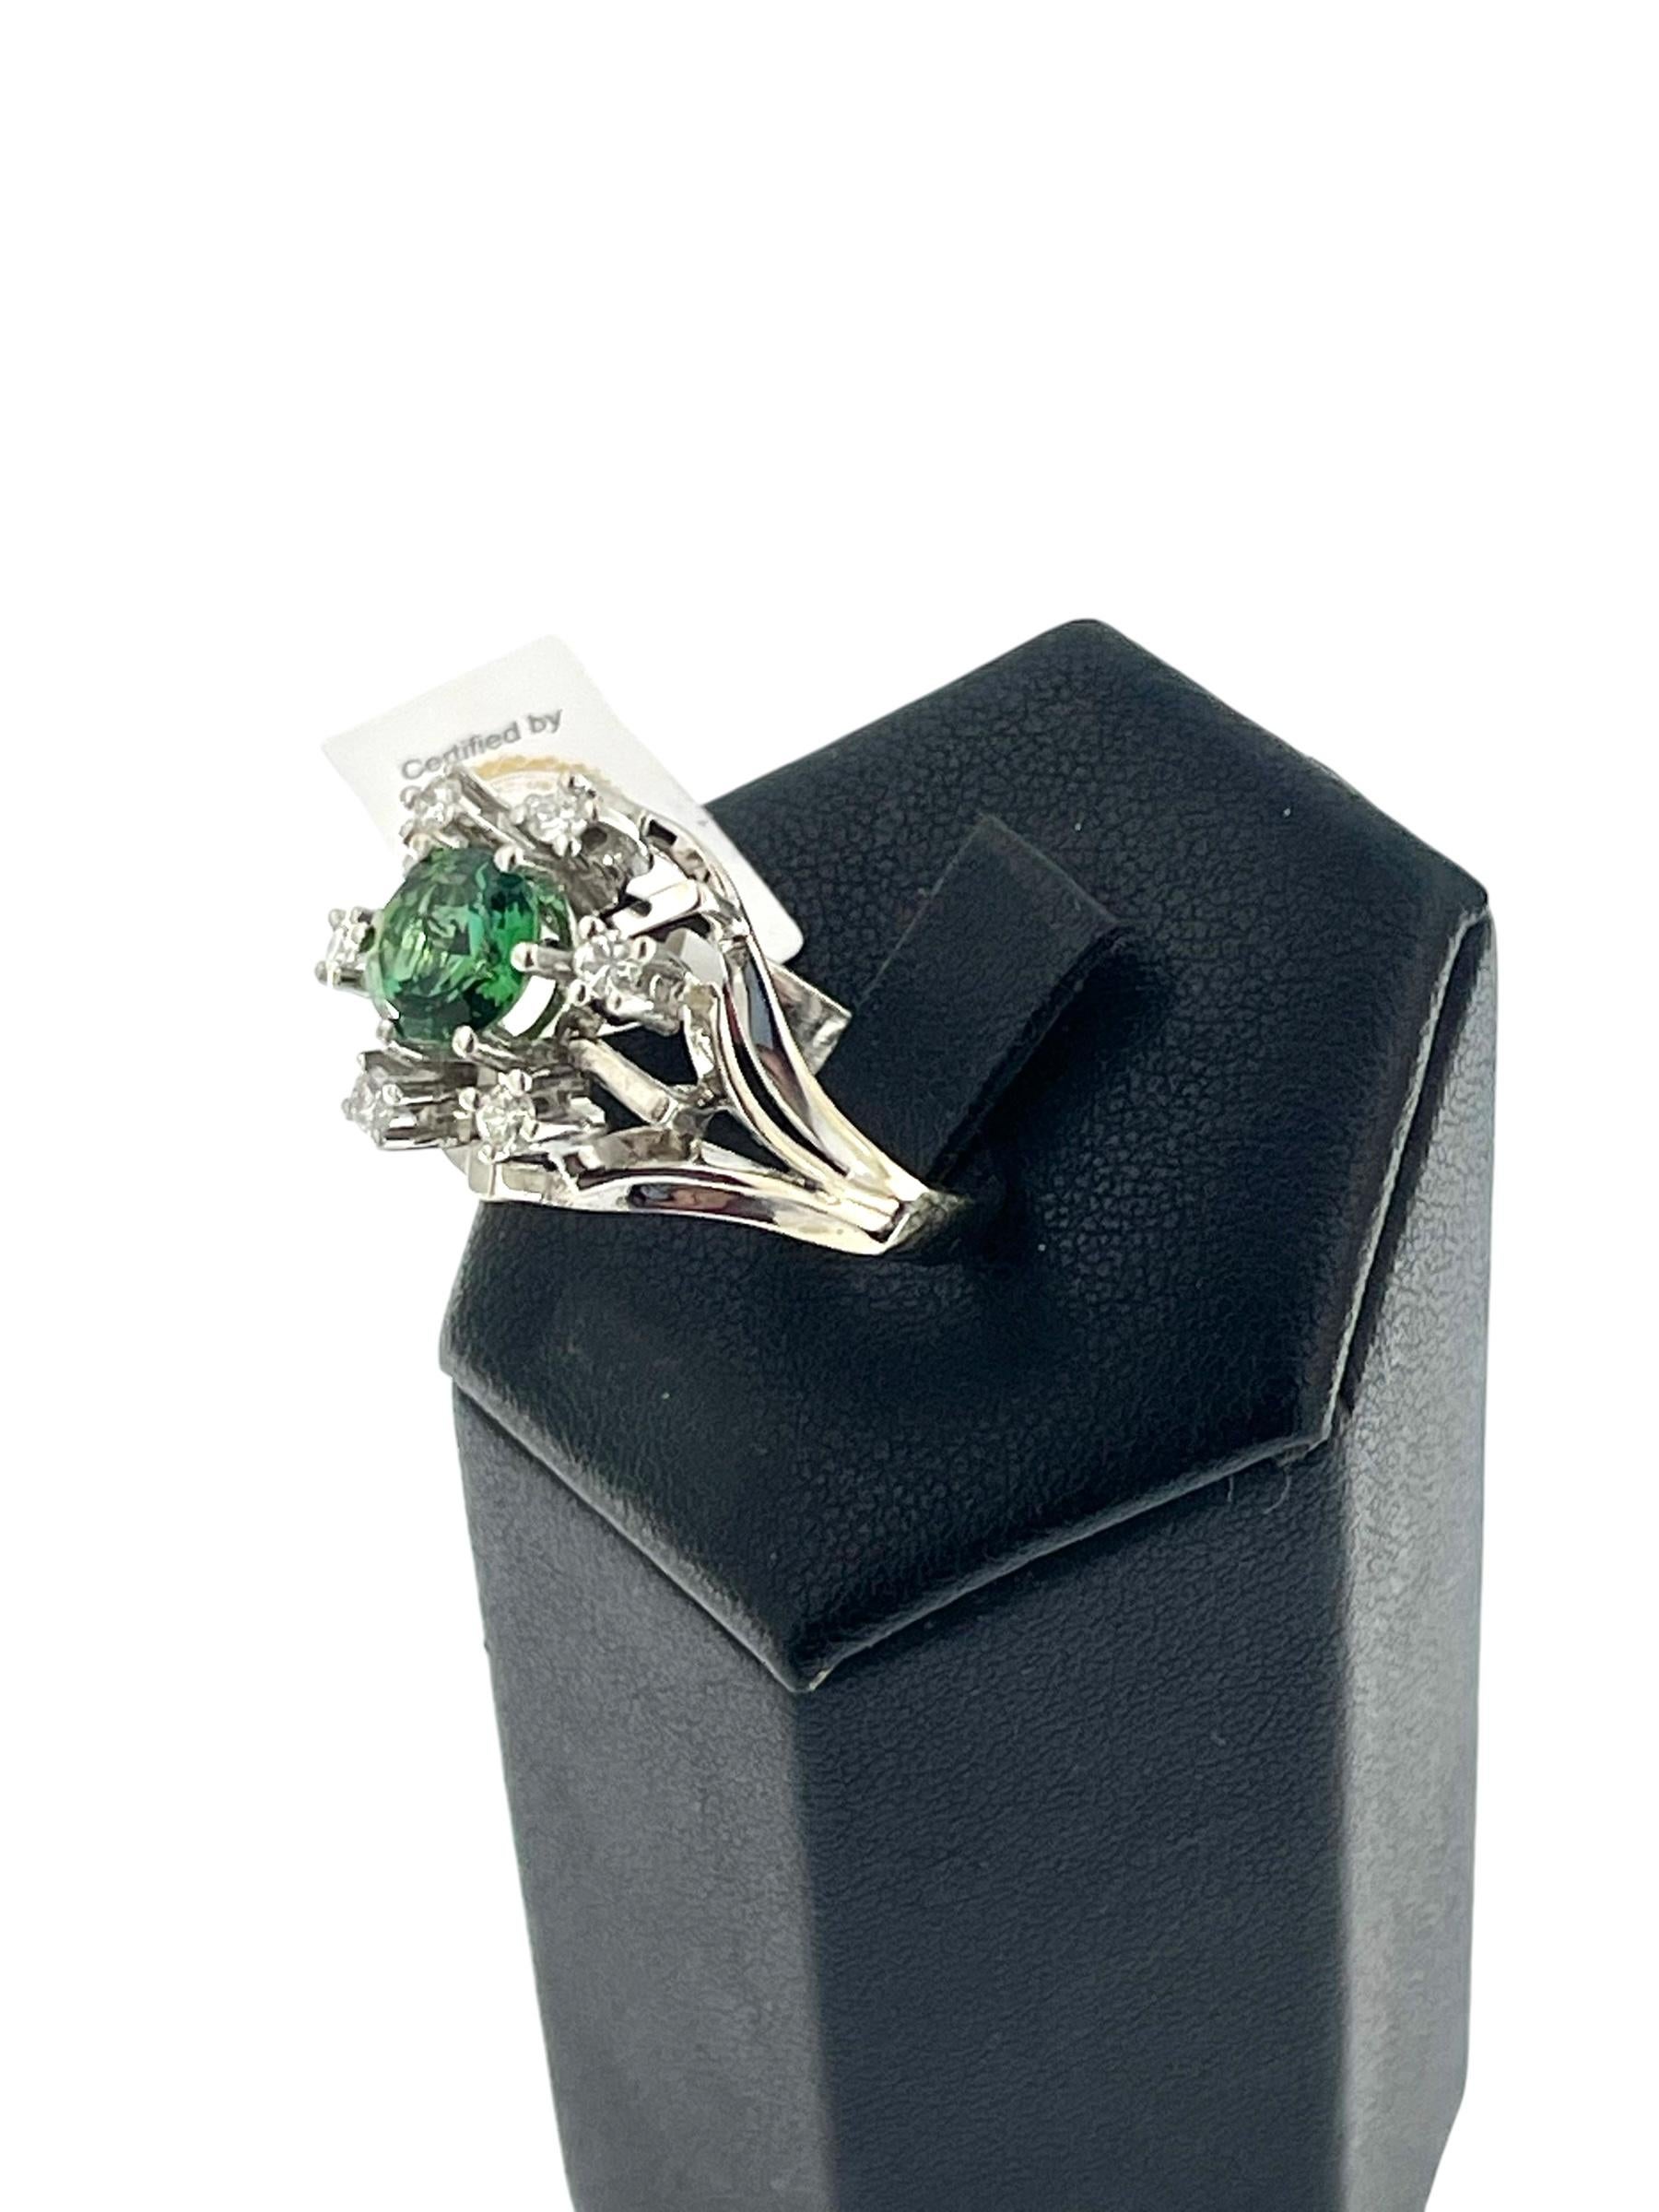 Women's IGI Certified White Gold Ring with Verdelite Tourmaline and Diamonds For Sale